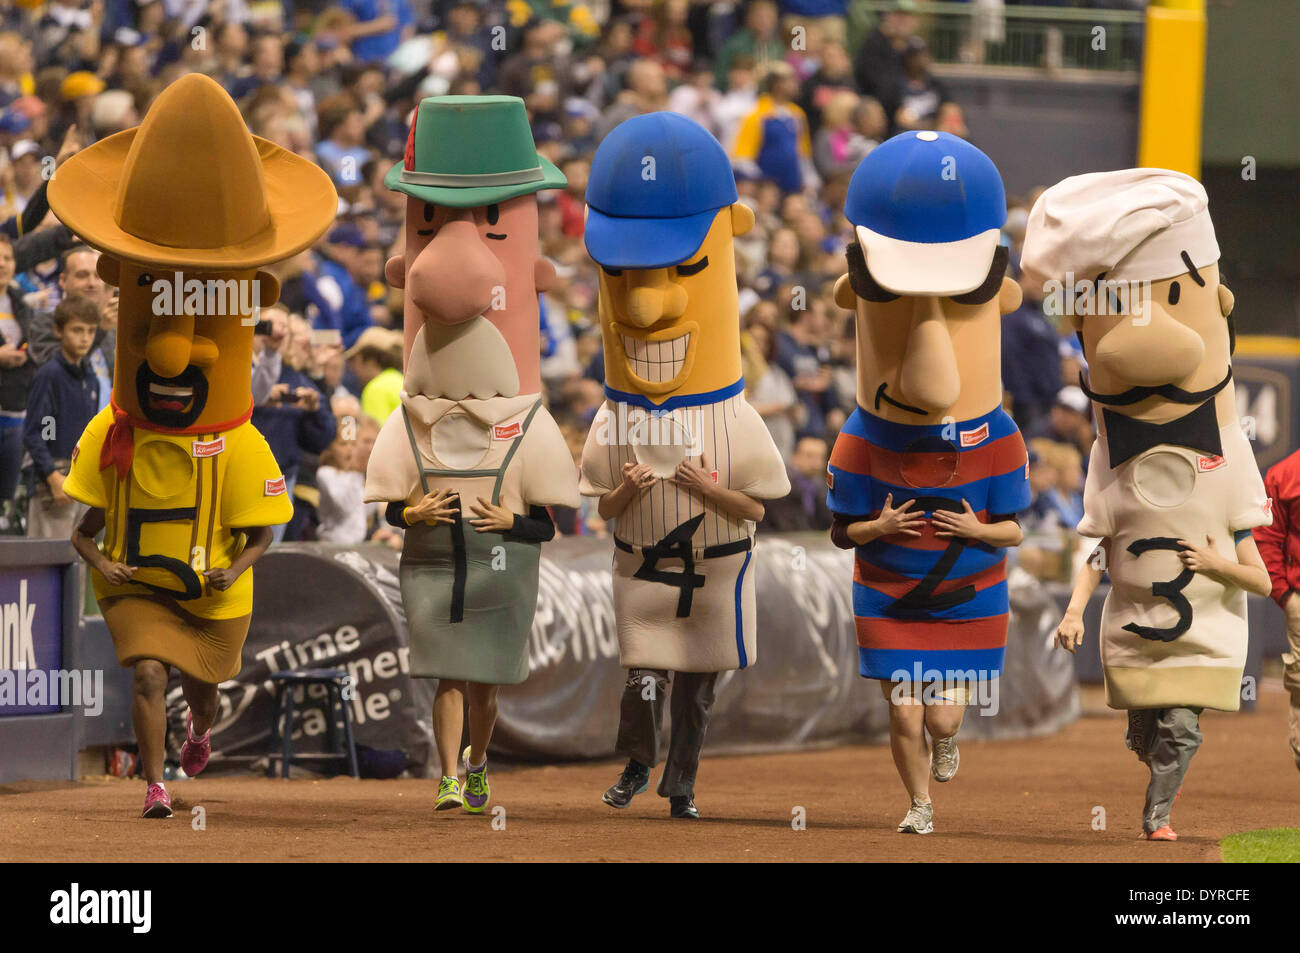 April 13, 2014 - Milwaukee, Wisconsin, United States of America - April 13,  2014: Bernie Brewer the mascot of the Brewers during the Major League  Baseball game between the Milwaukee Brewers and